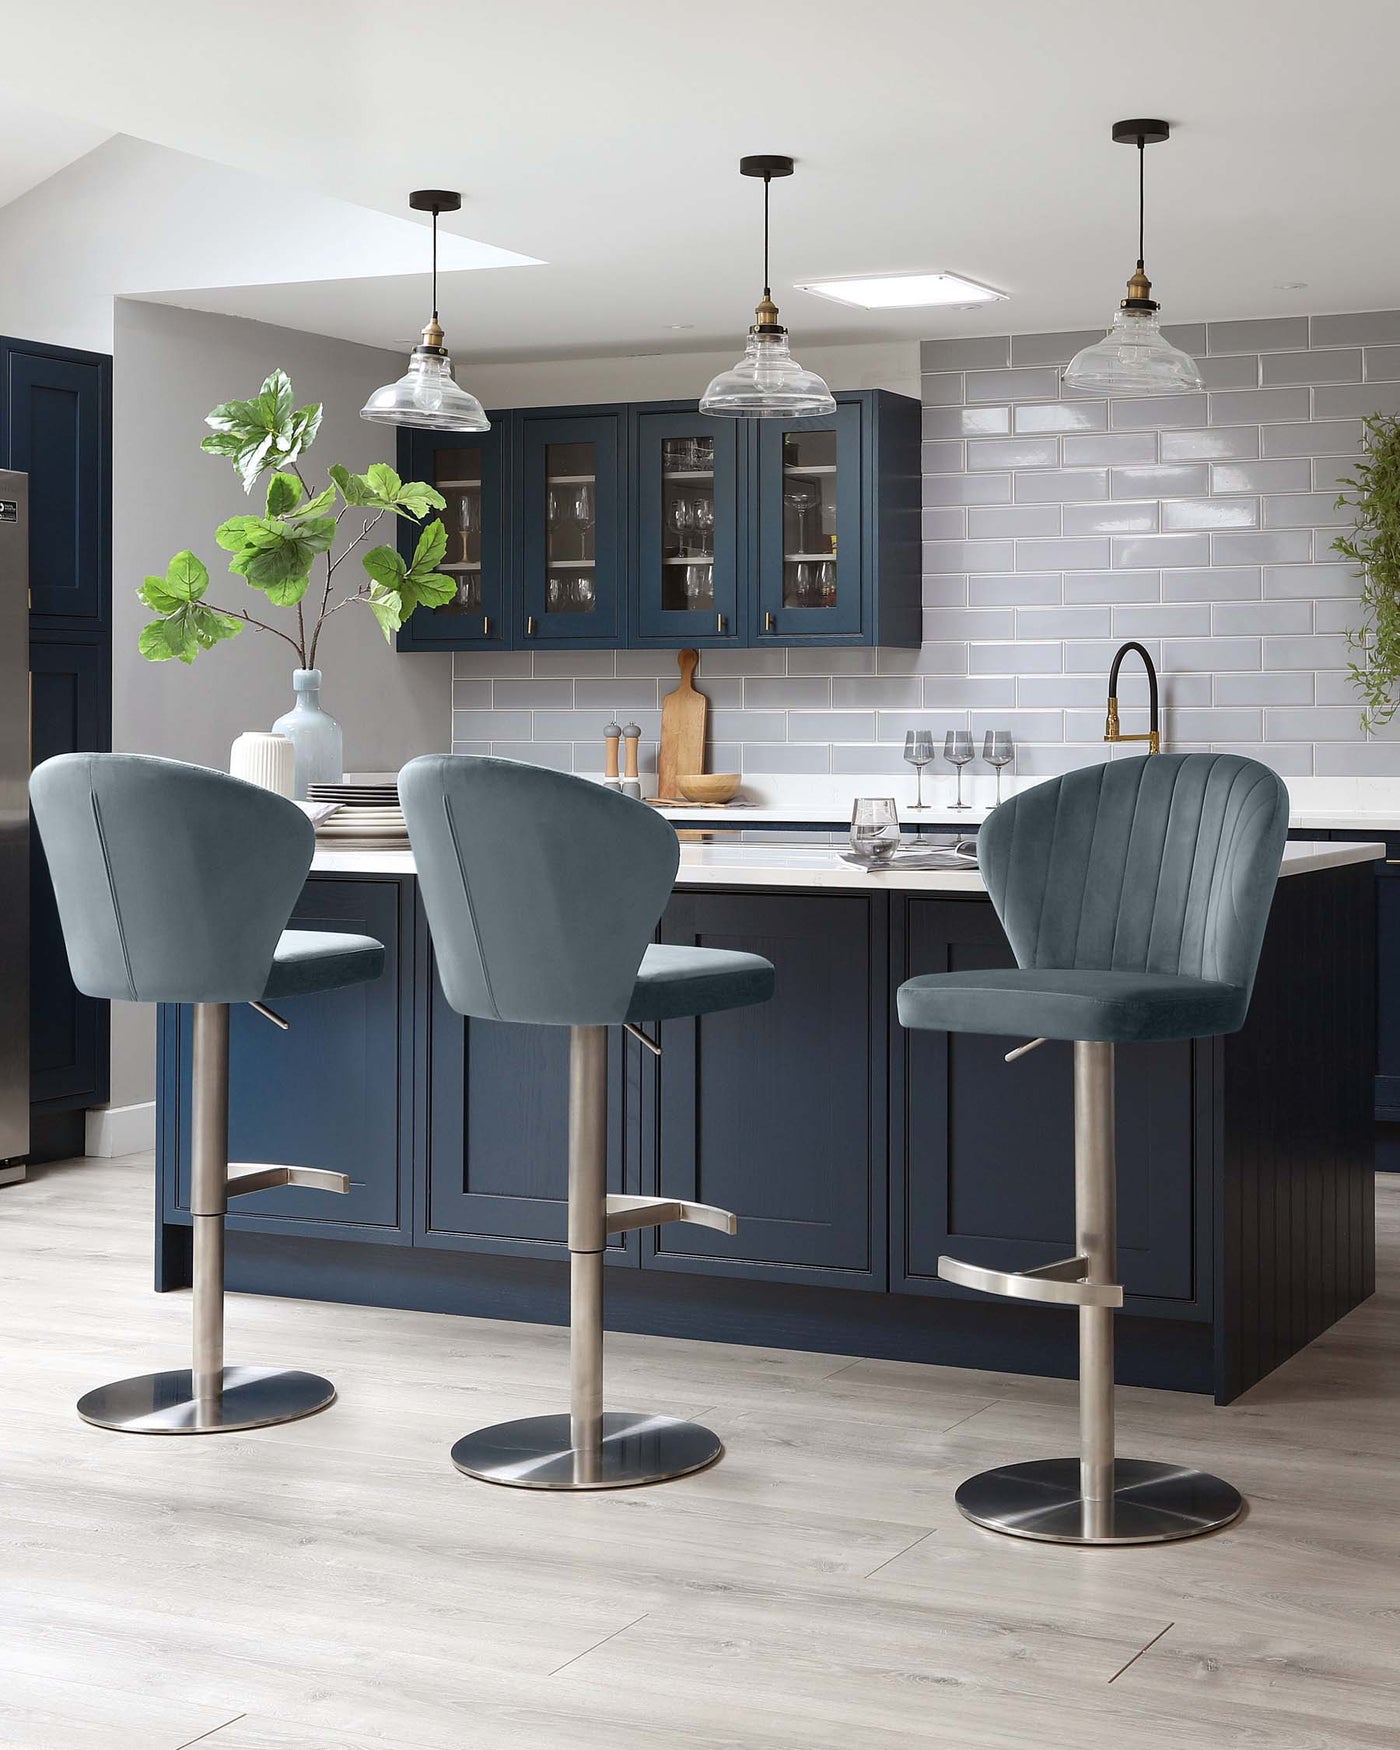 Modern kitchen with three elegant upholstered bar stools featuring curved backs and plush seating, supported by sleek metallic pedestals and circular bases.